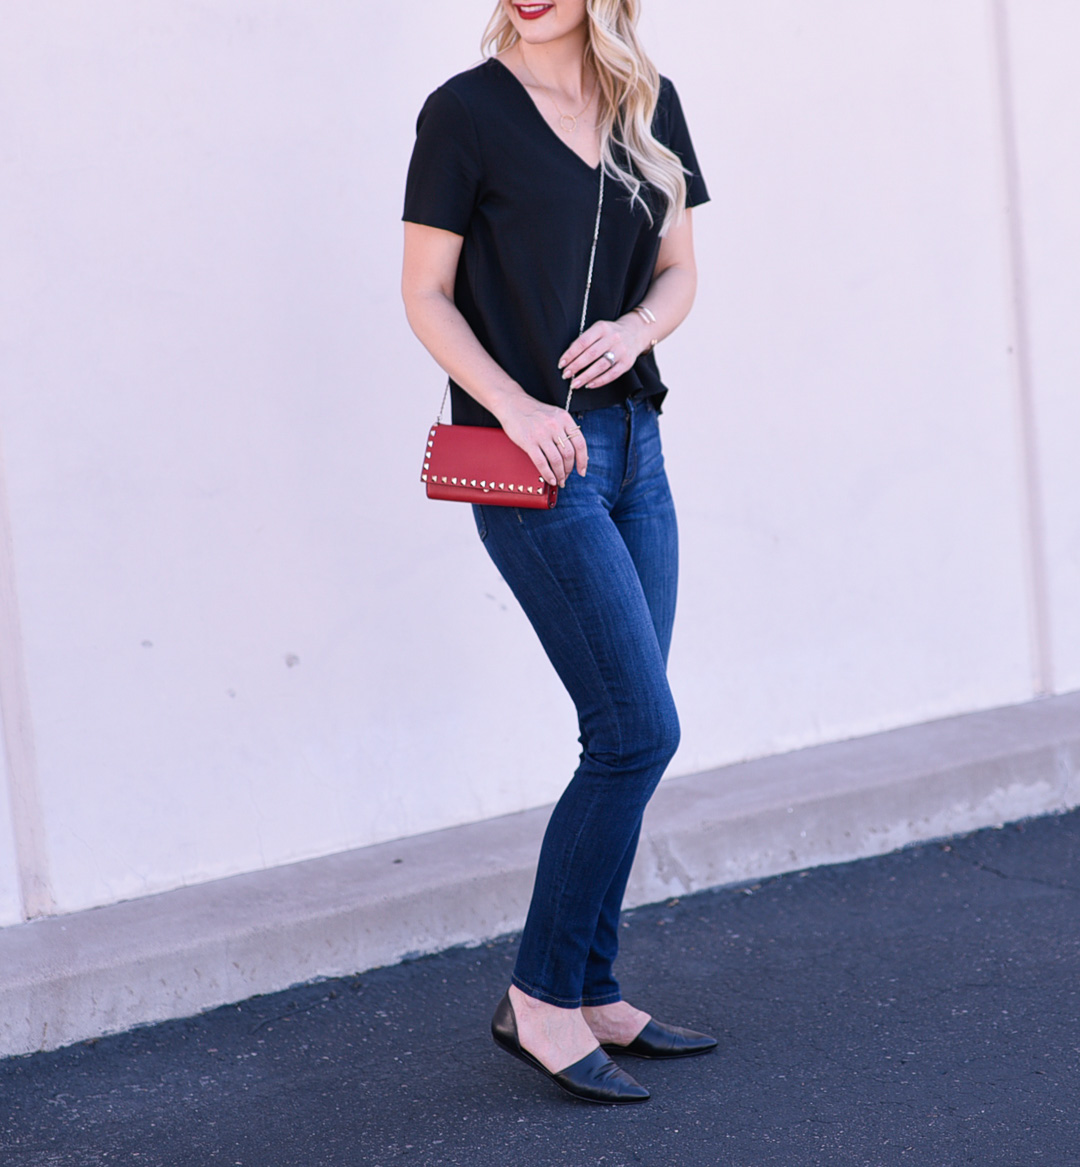 Jenna Colgrove wearing black leather flats and dark wash DL1961 skinny jeans.